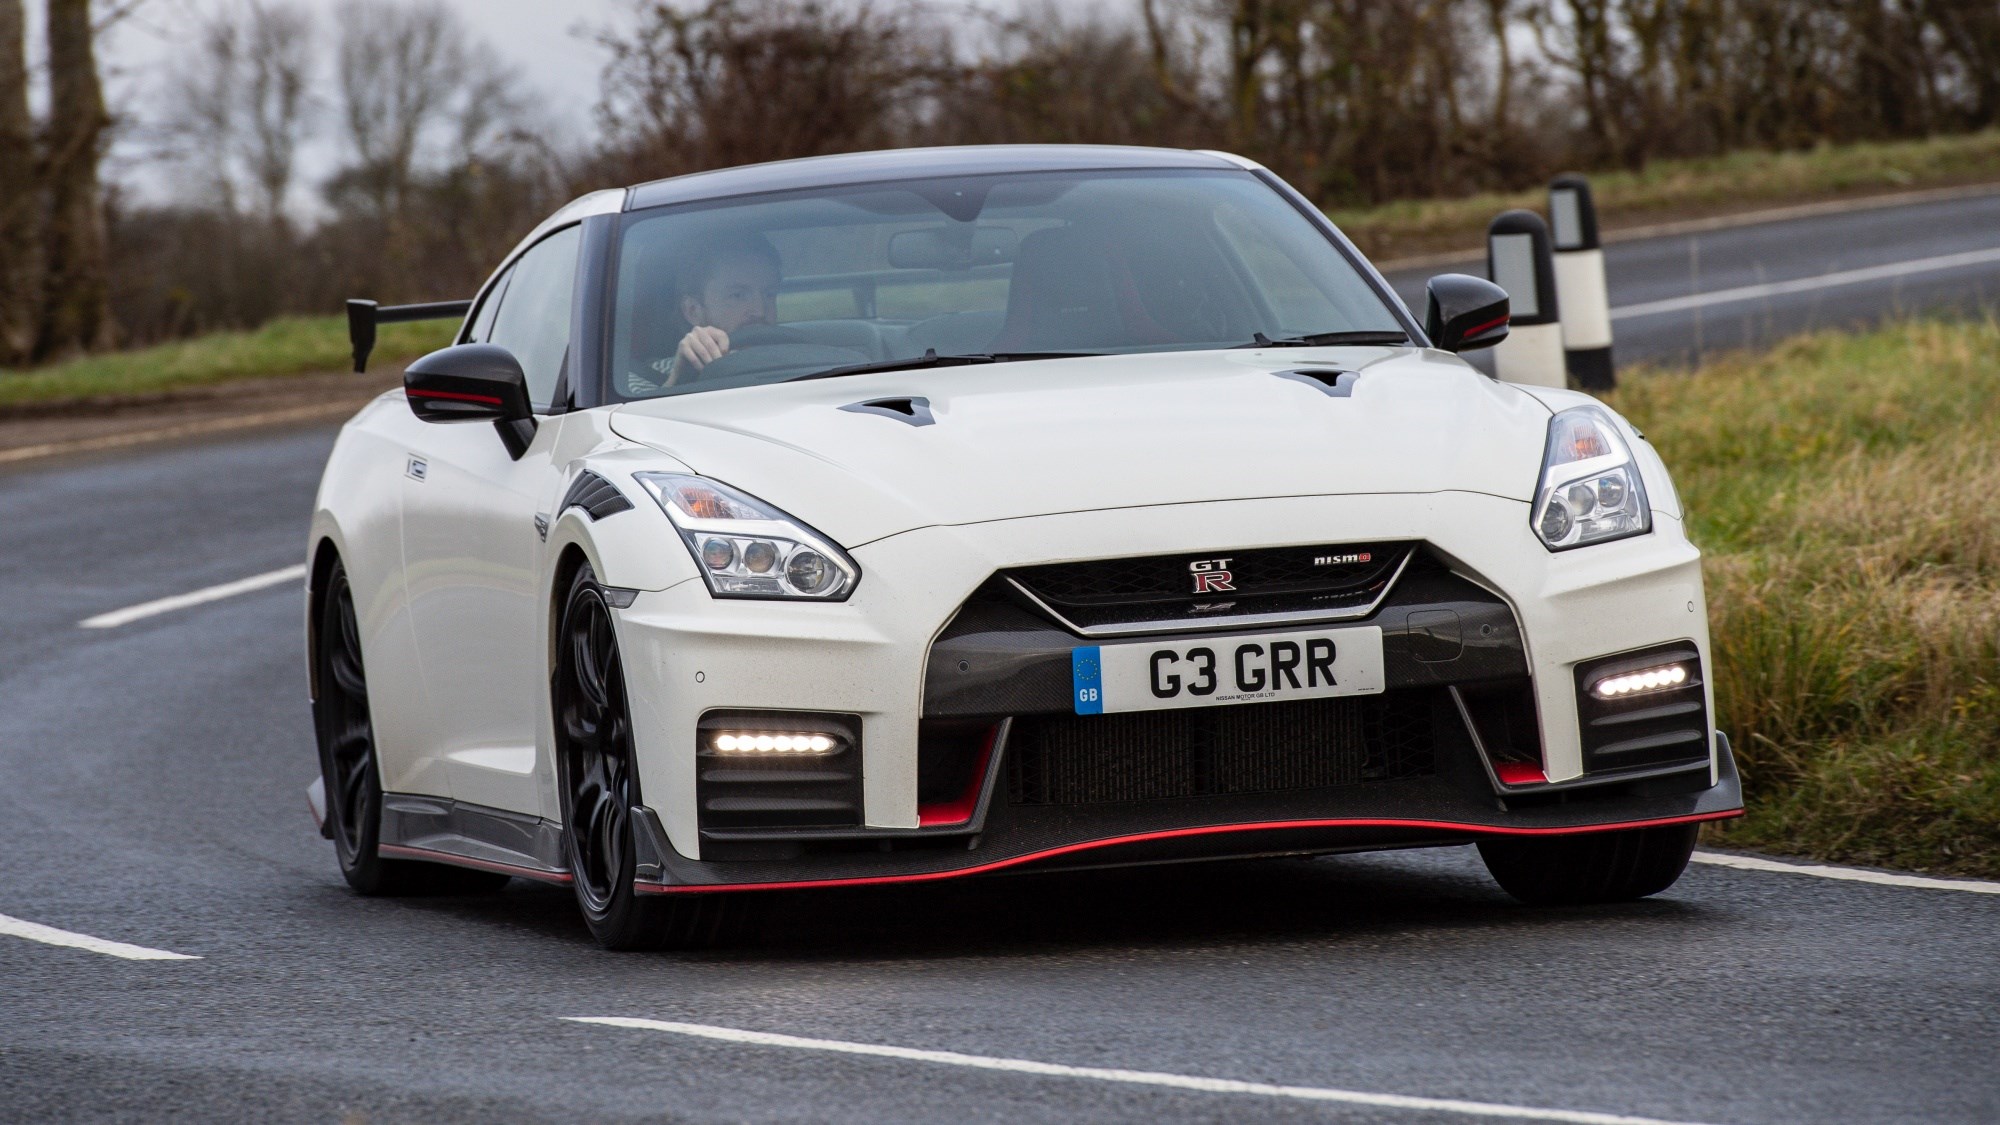 2017 Nissan GT-R NISMO - Specs and Photos of the Updated GTR NISMO